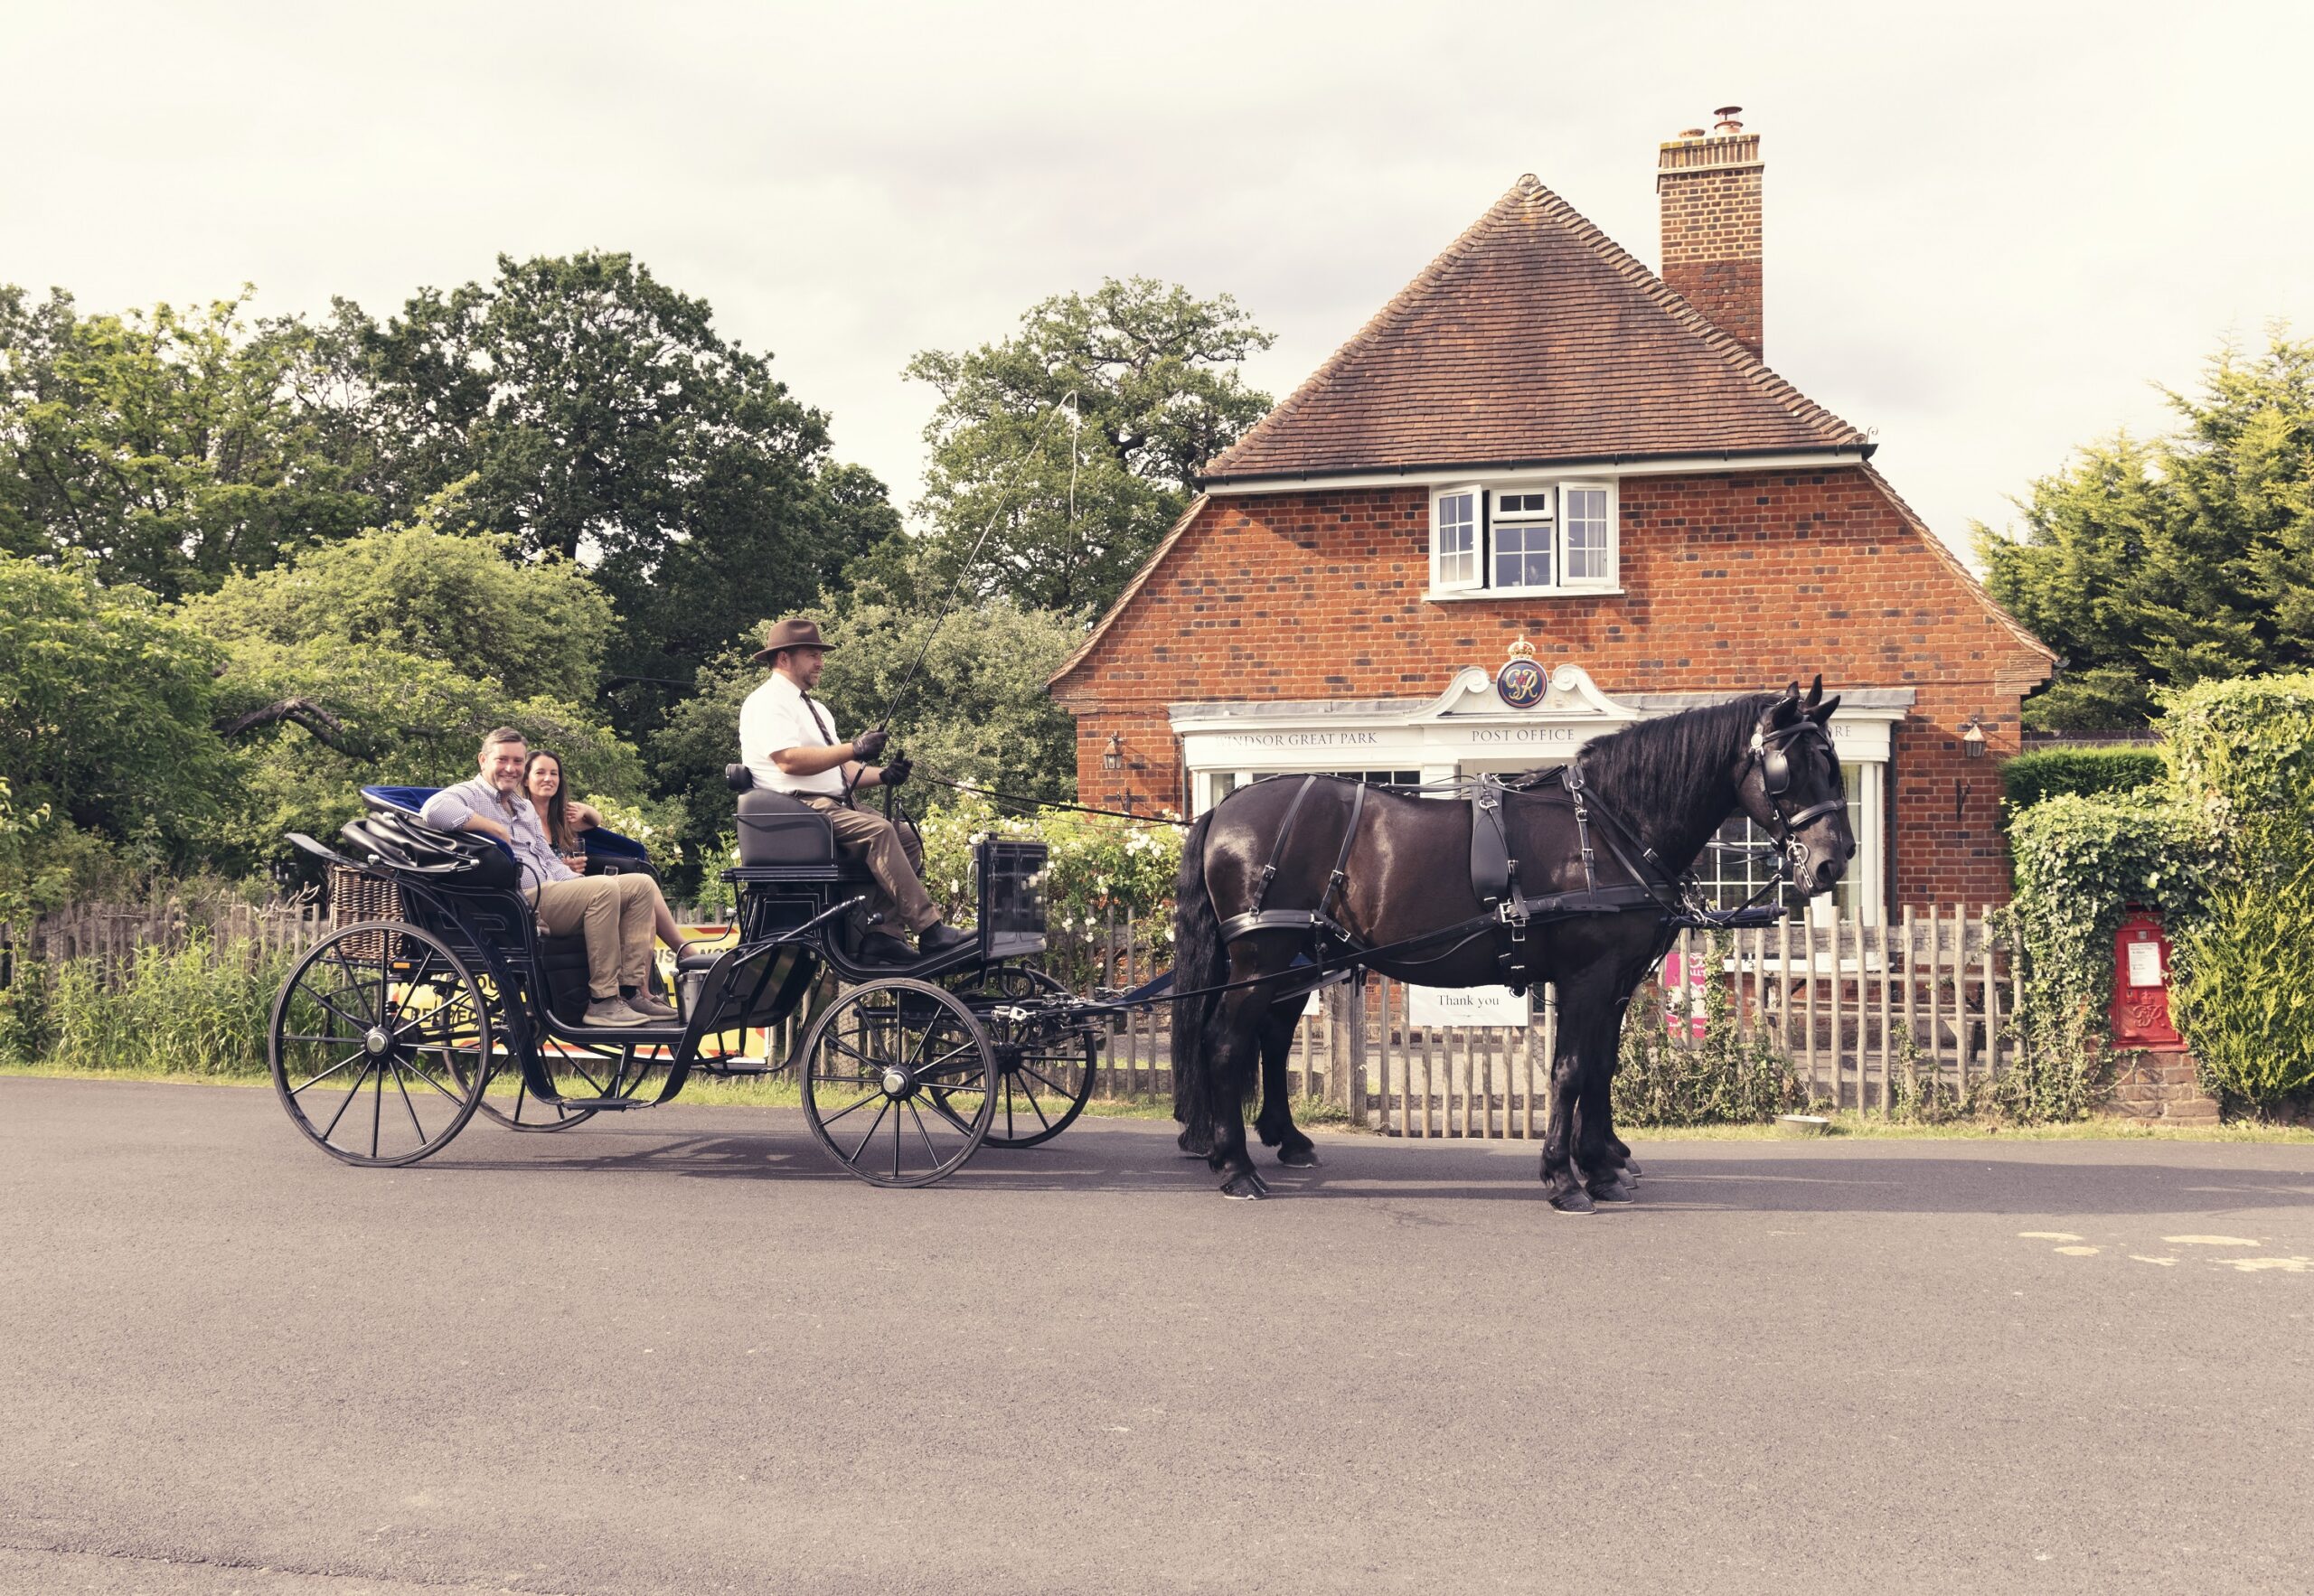 Windsor Carriages in front of Village Post Office.